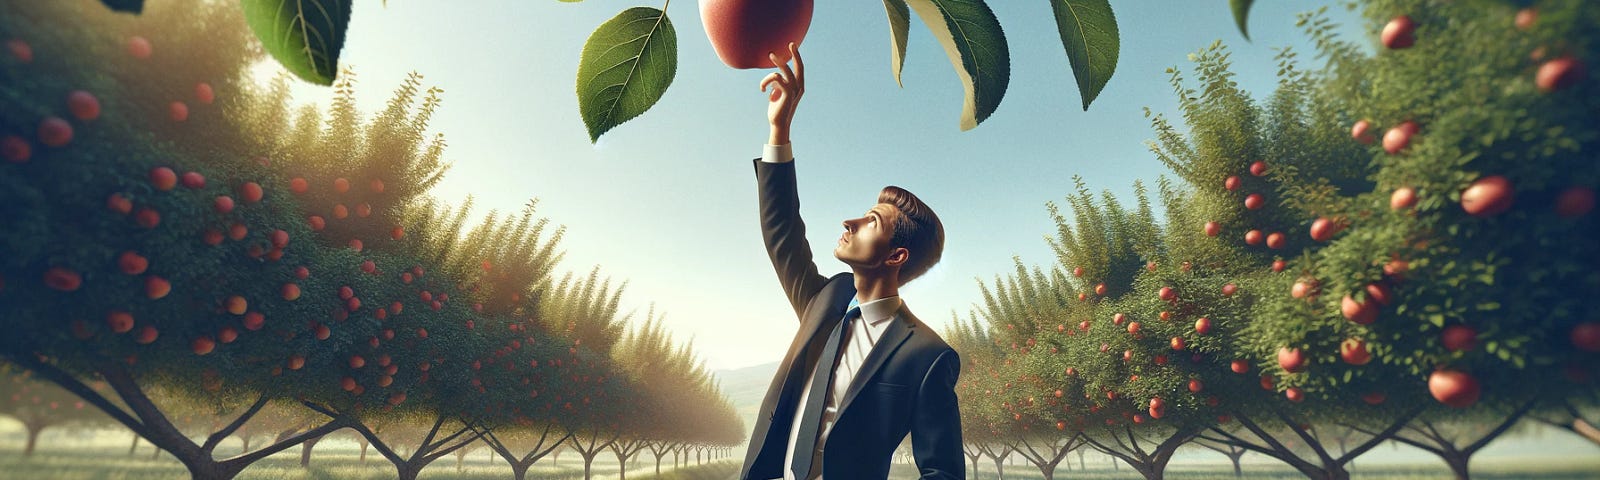 ChatGPT & DALL-E generated panoramic image of a politician reaching up to pick an apple from a low branch, set in a serene orchard landscape.